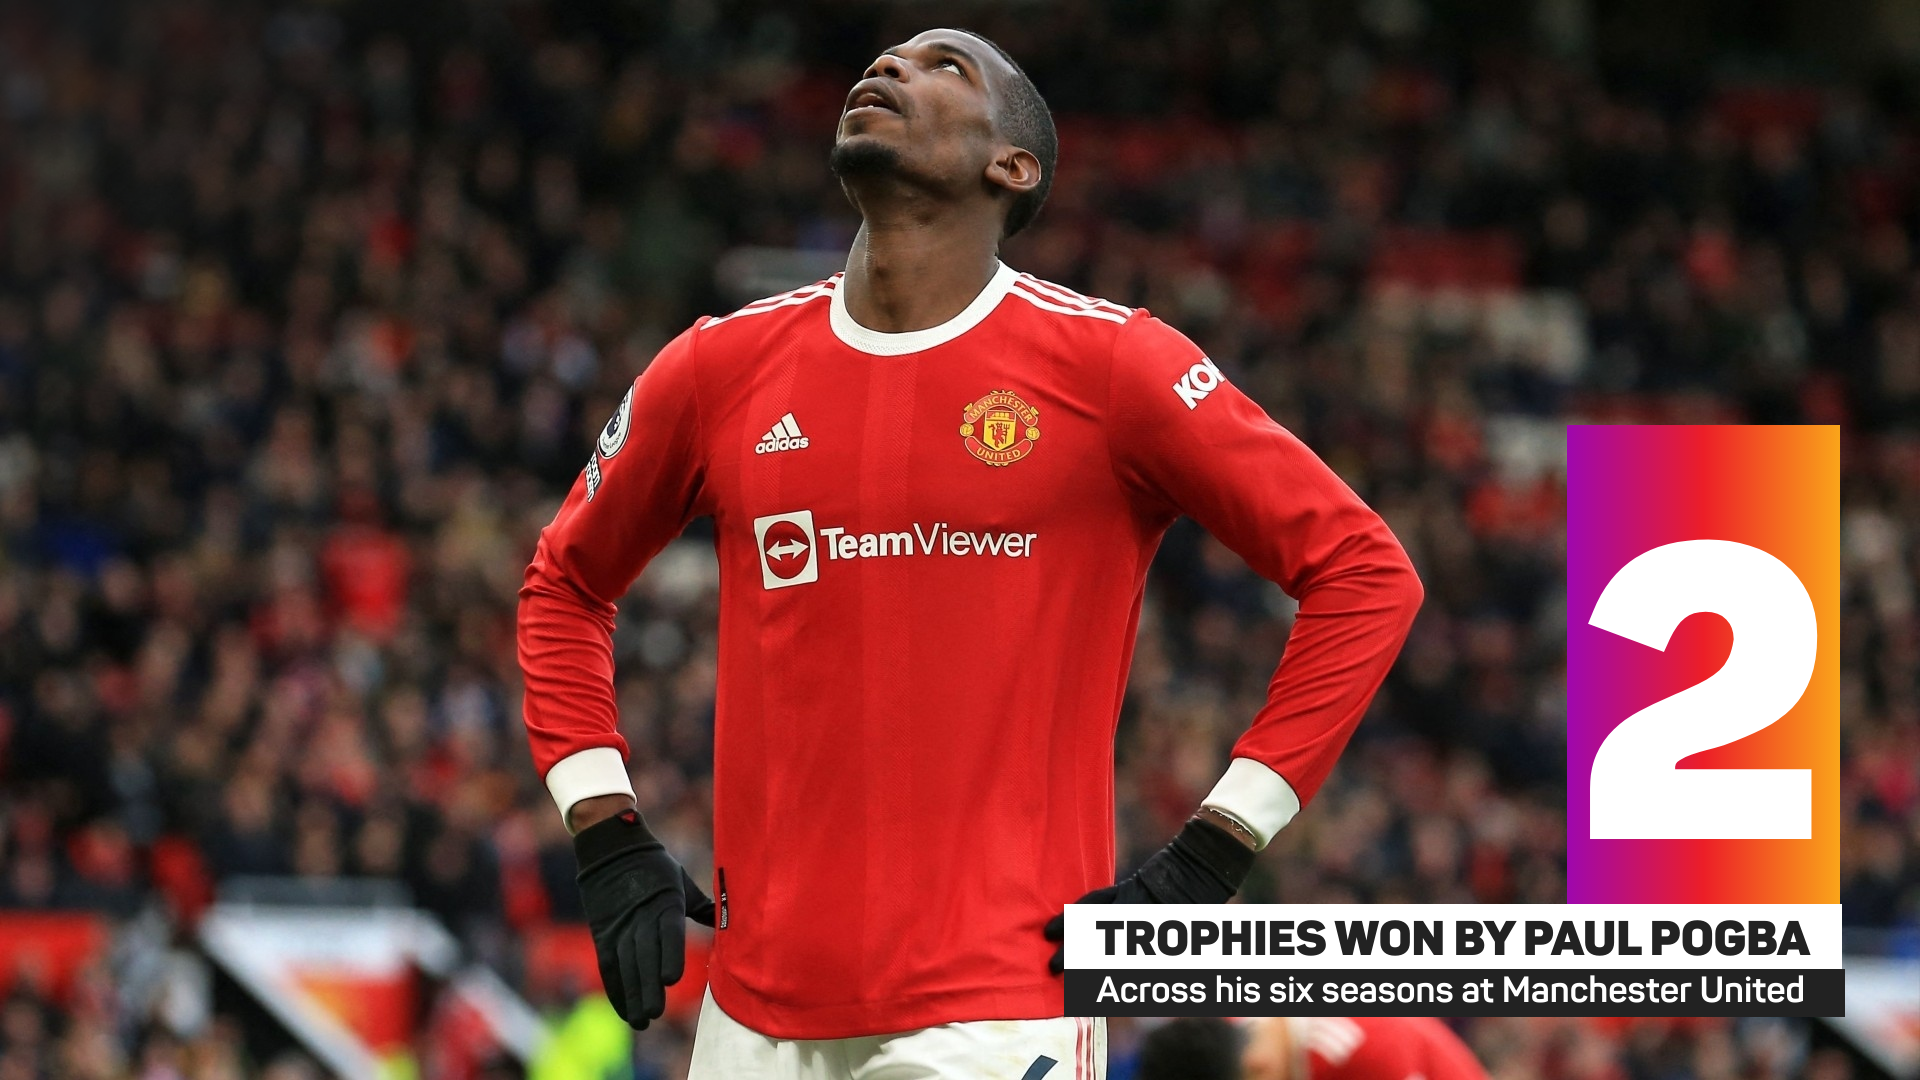 Paul Pogba has won two trophies at Manchester United